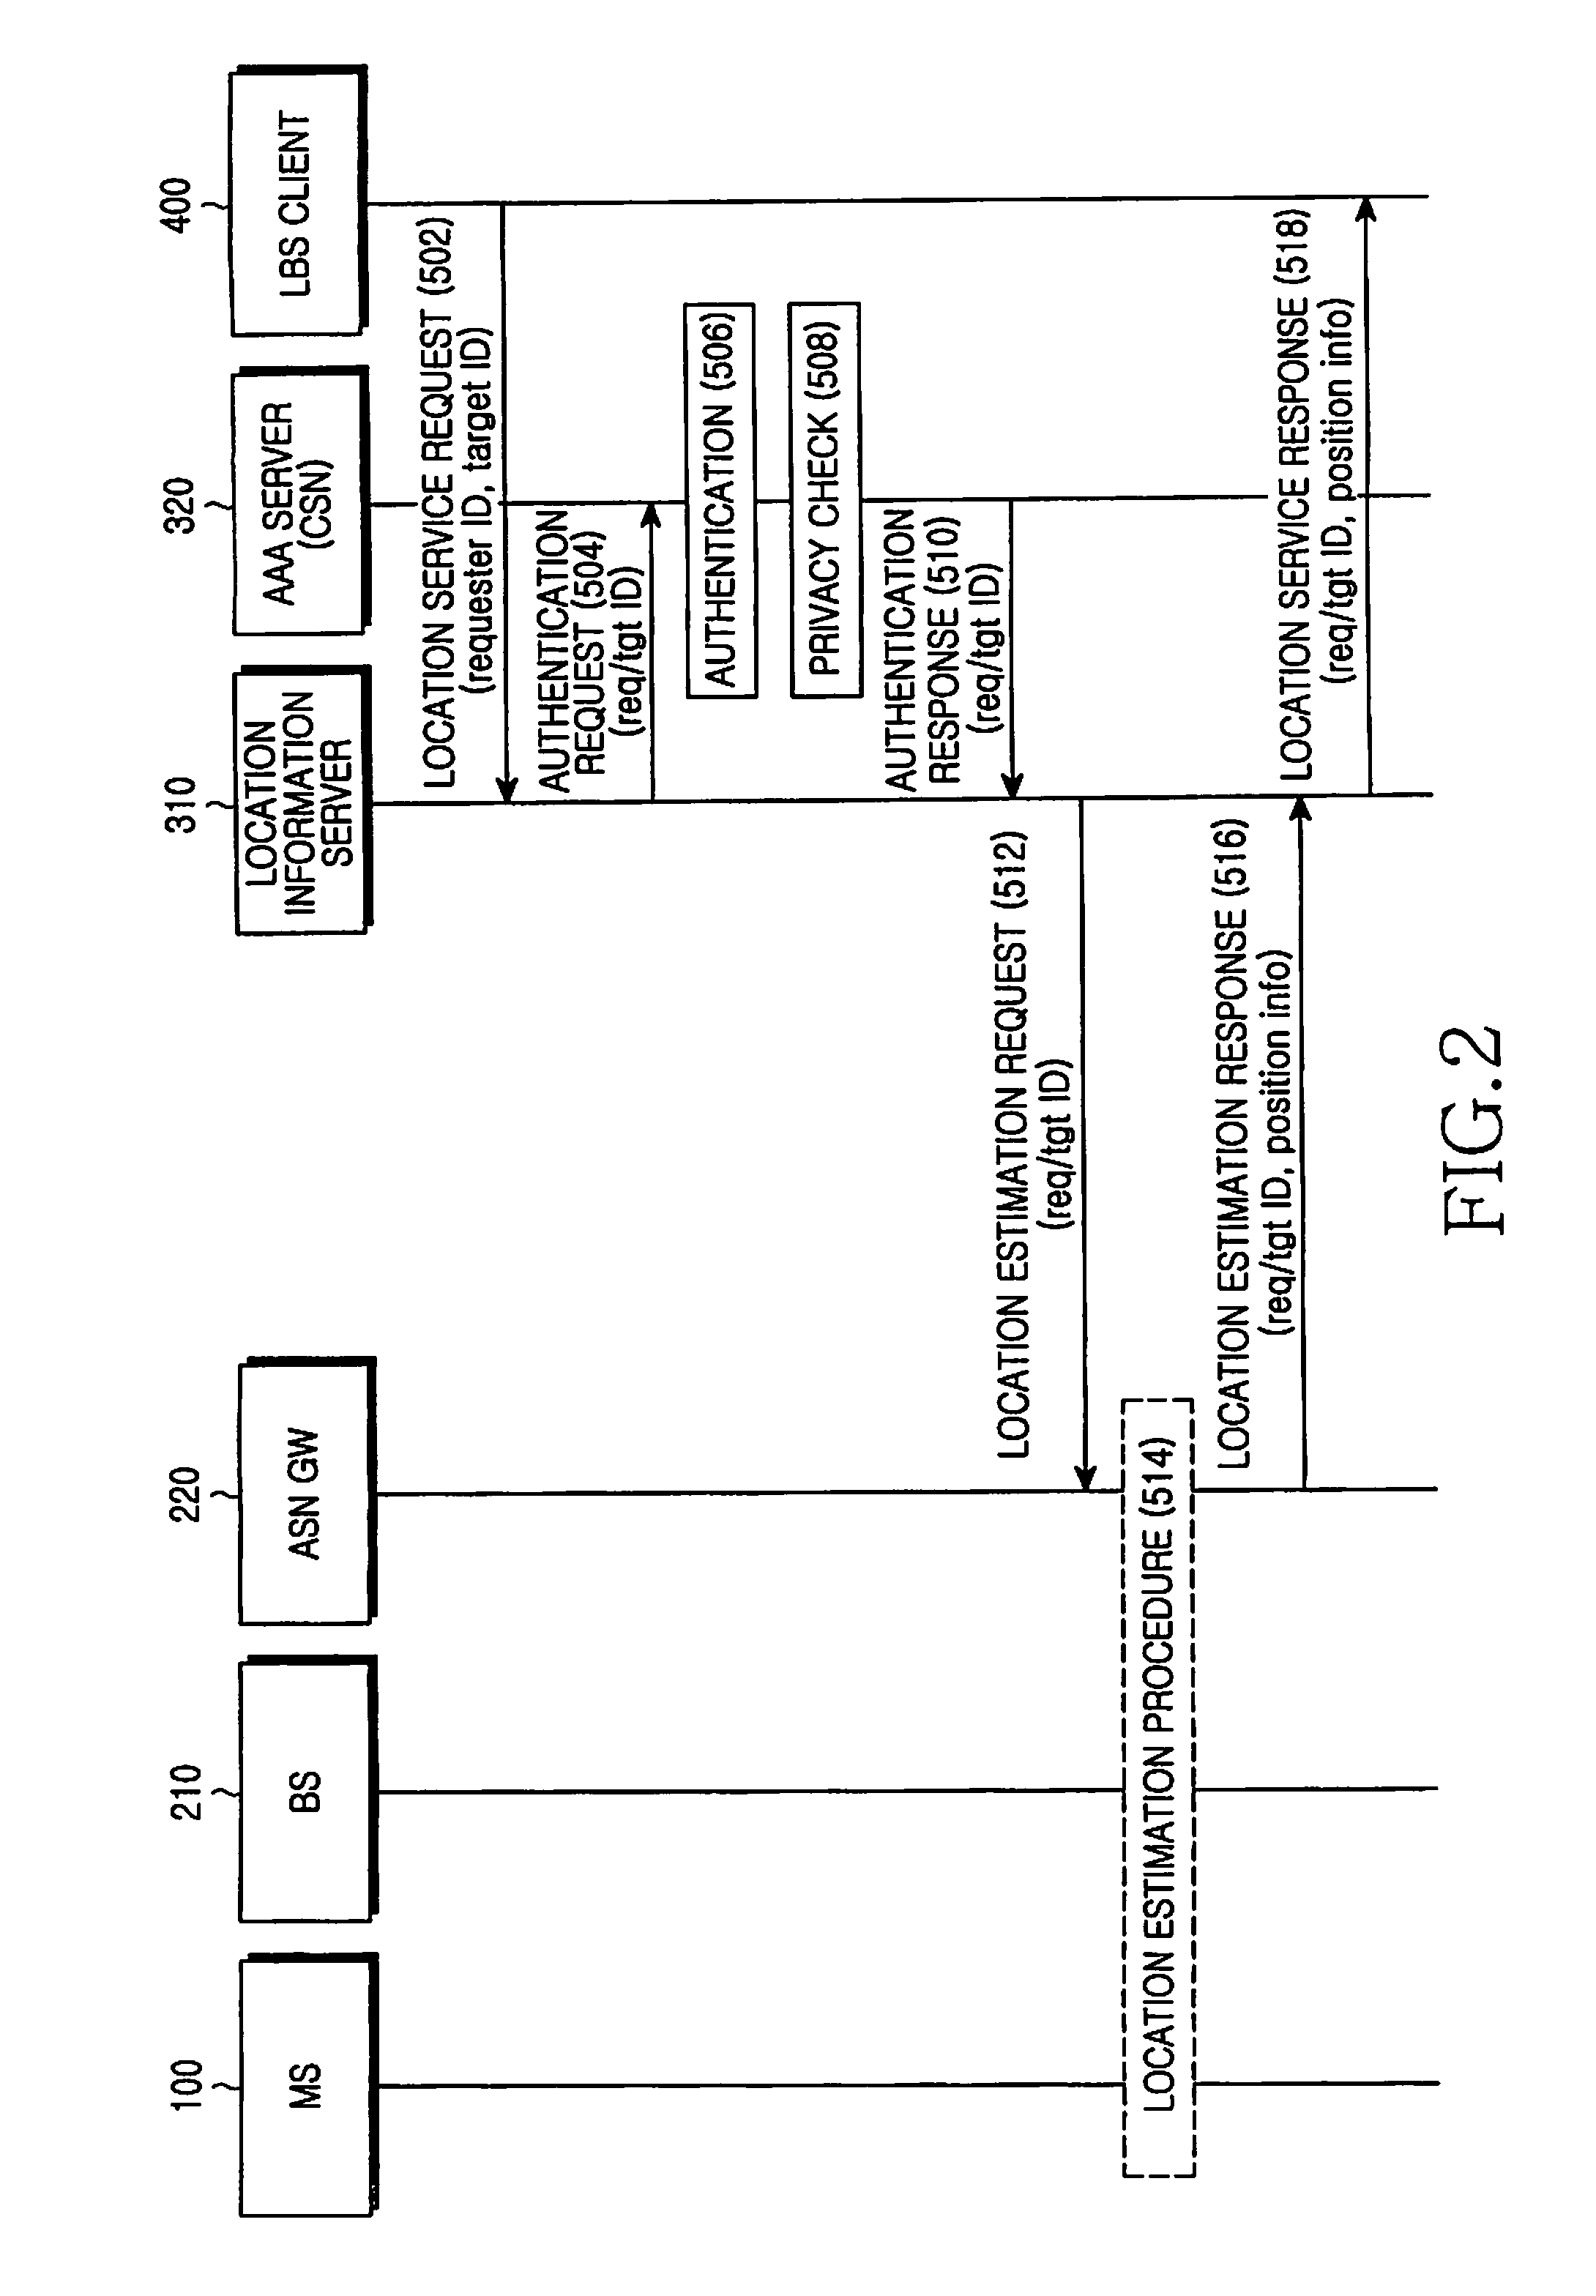 System and method for providing location based services in a mobile communication system